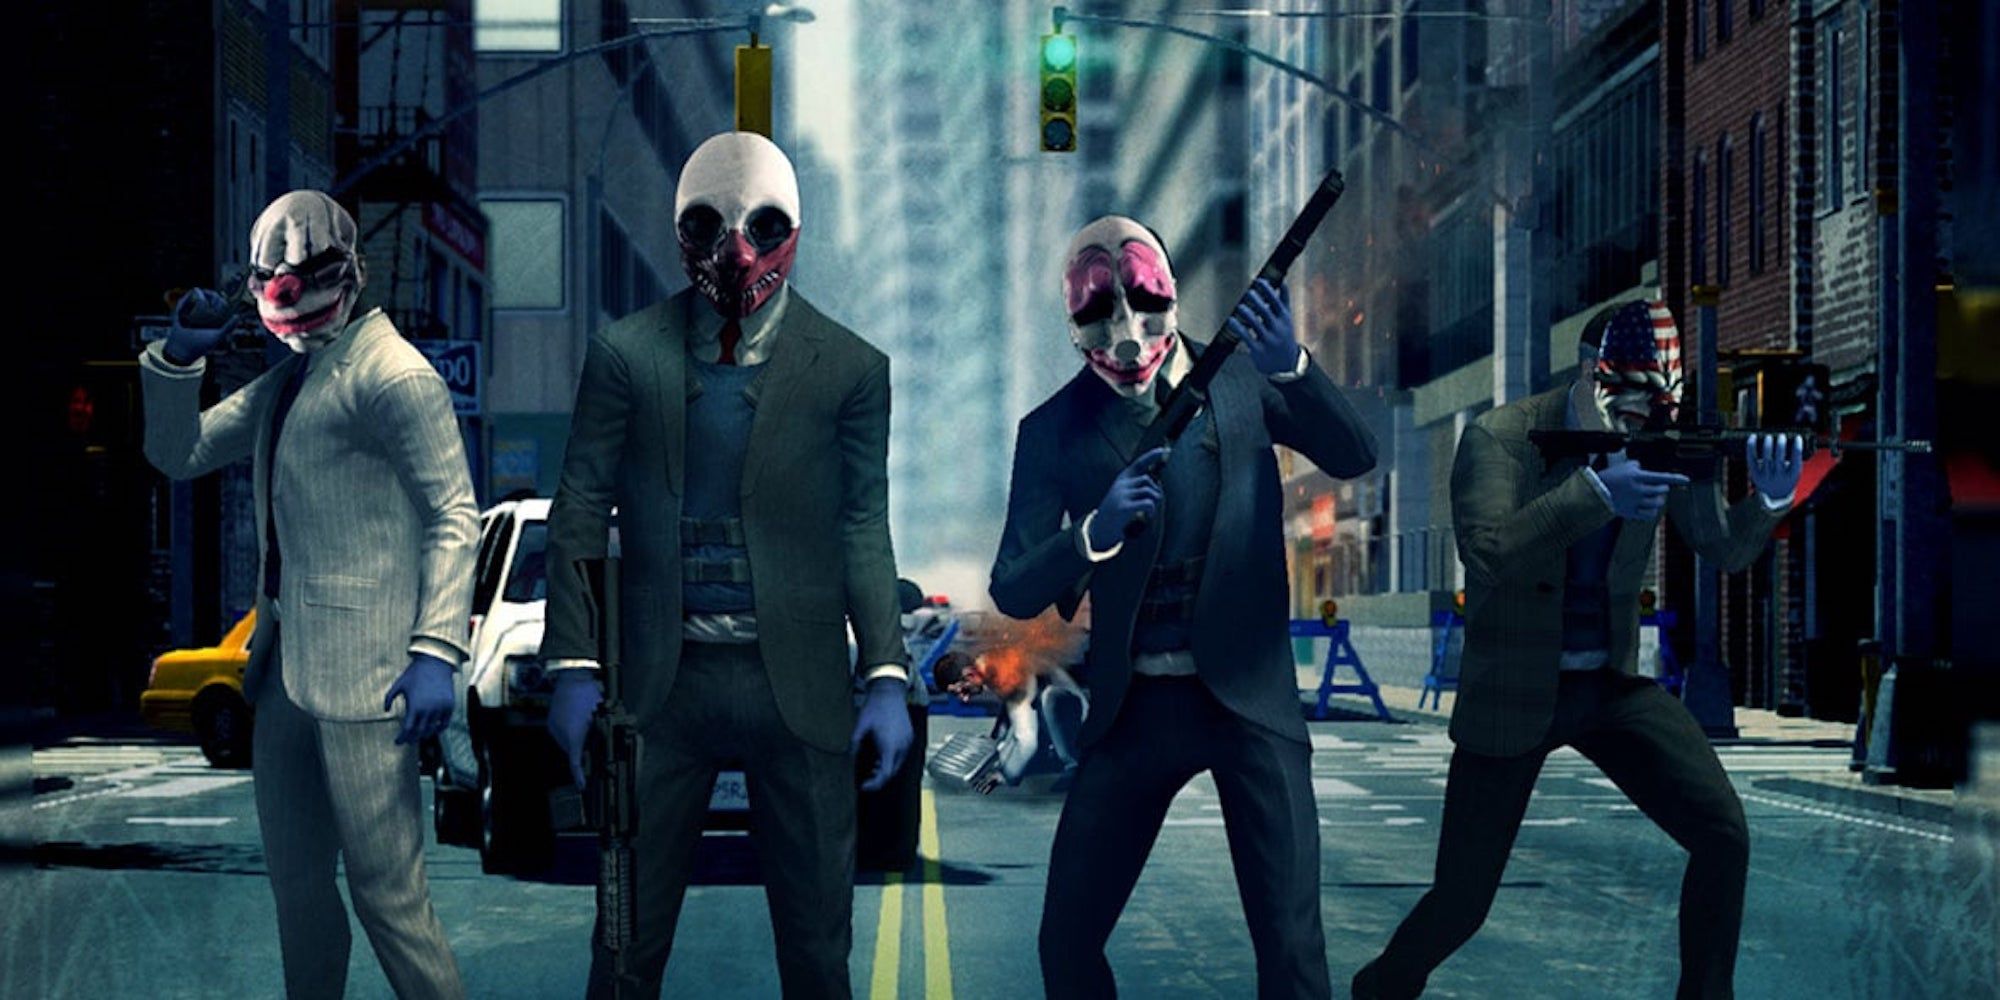 Characters lined up in the street wearing suits and masks (Payday 2)